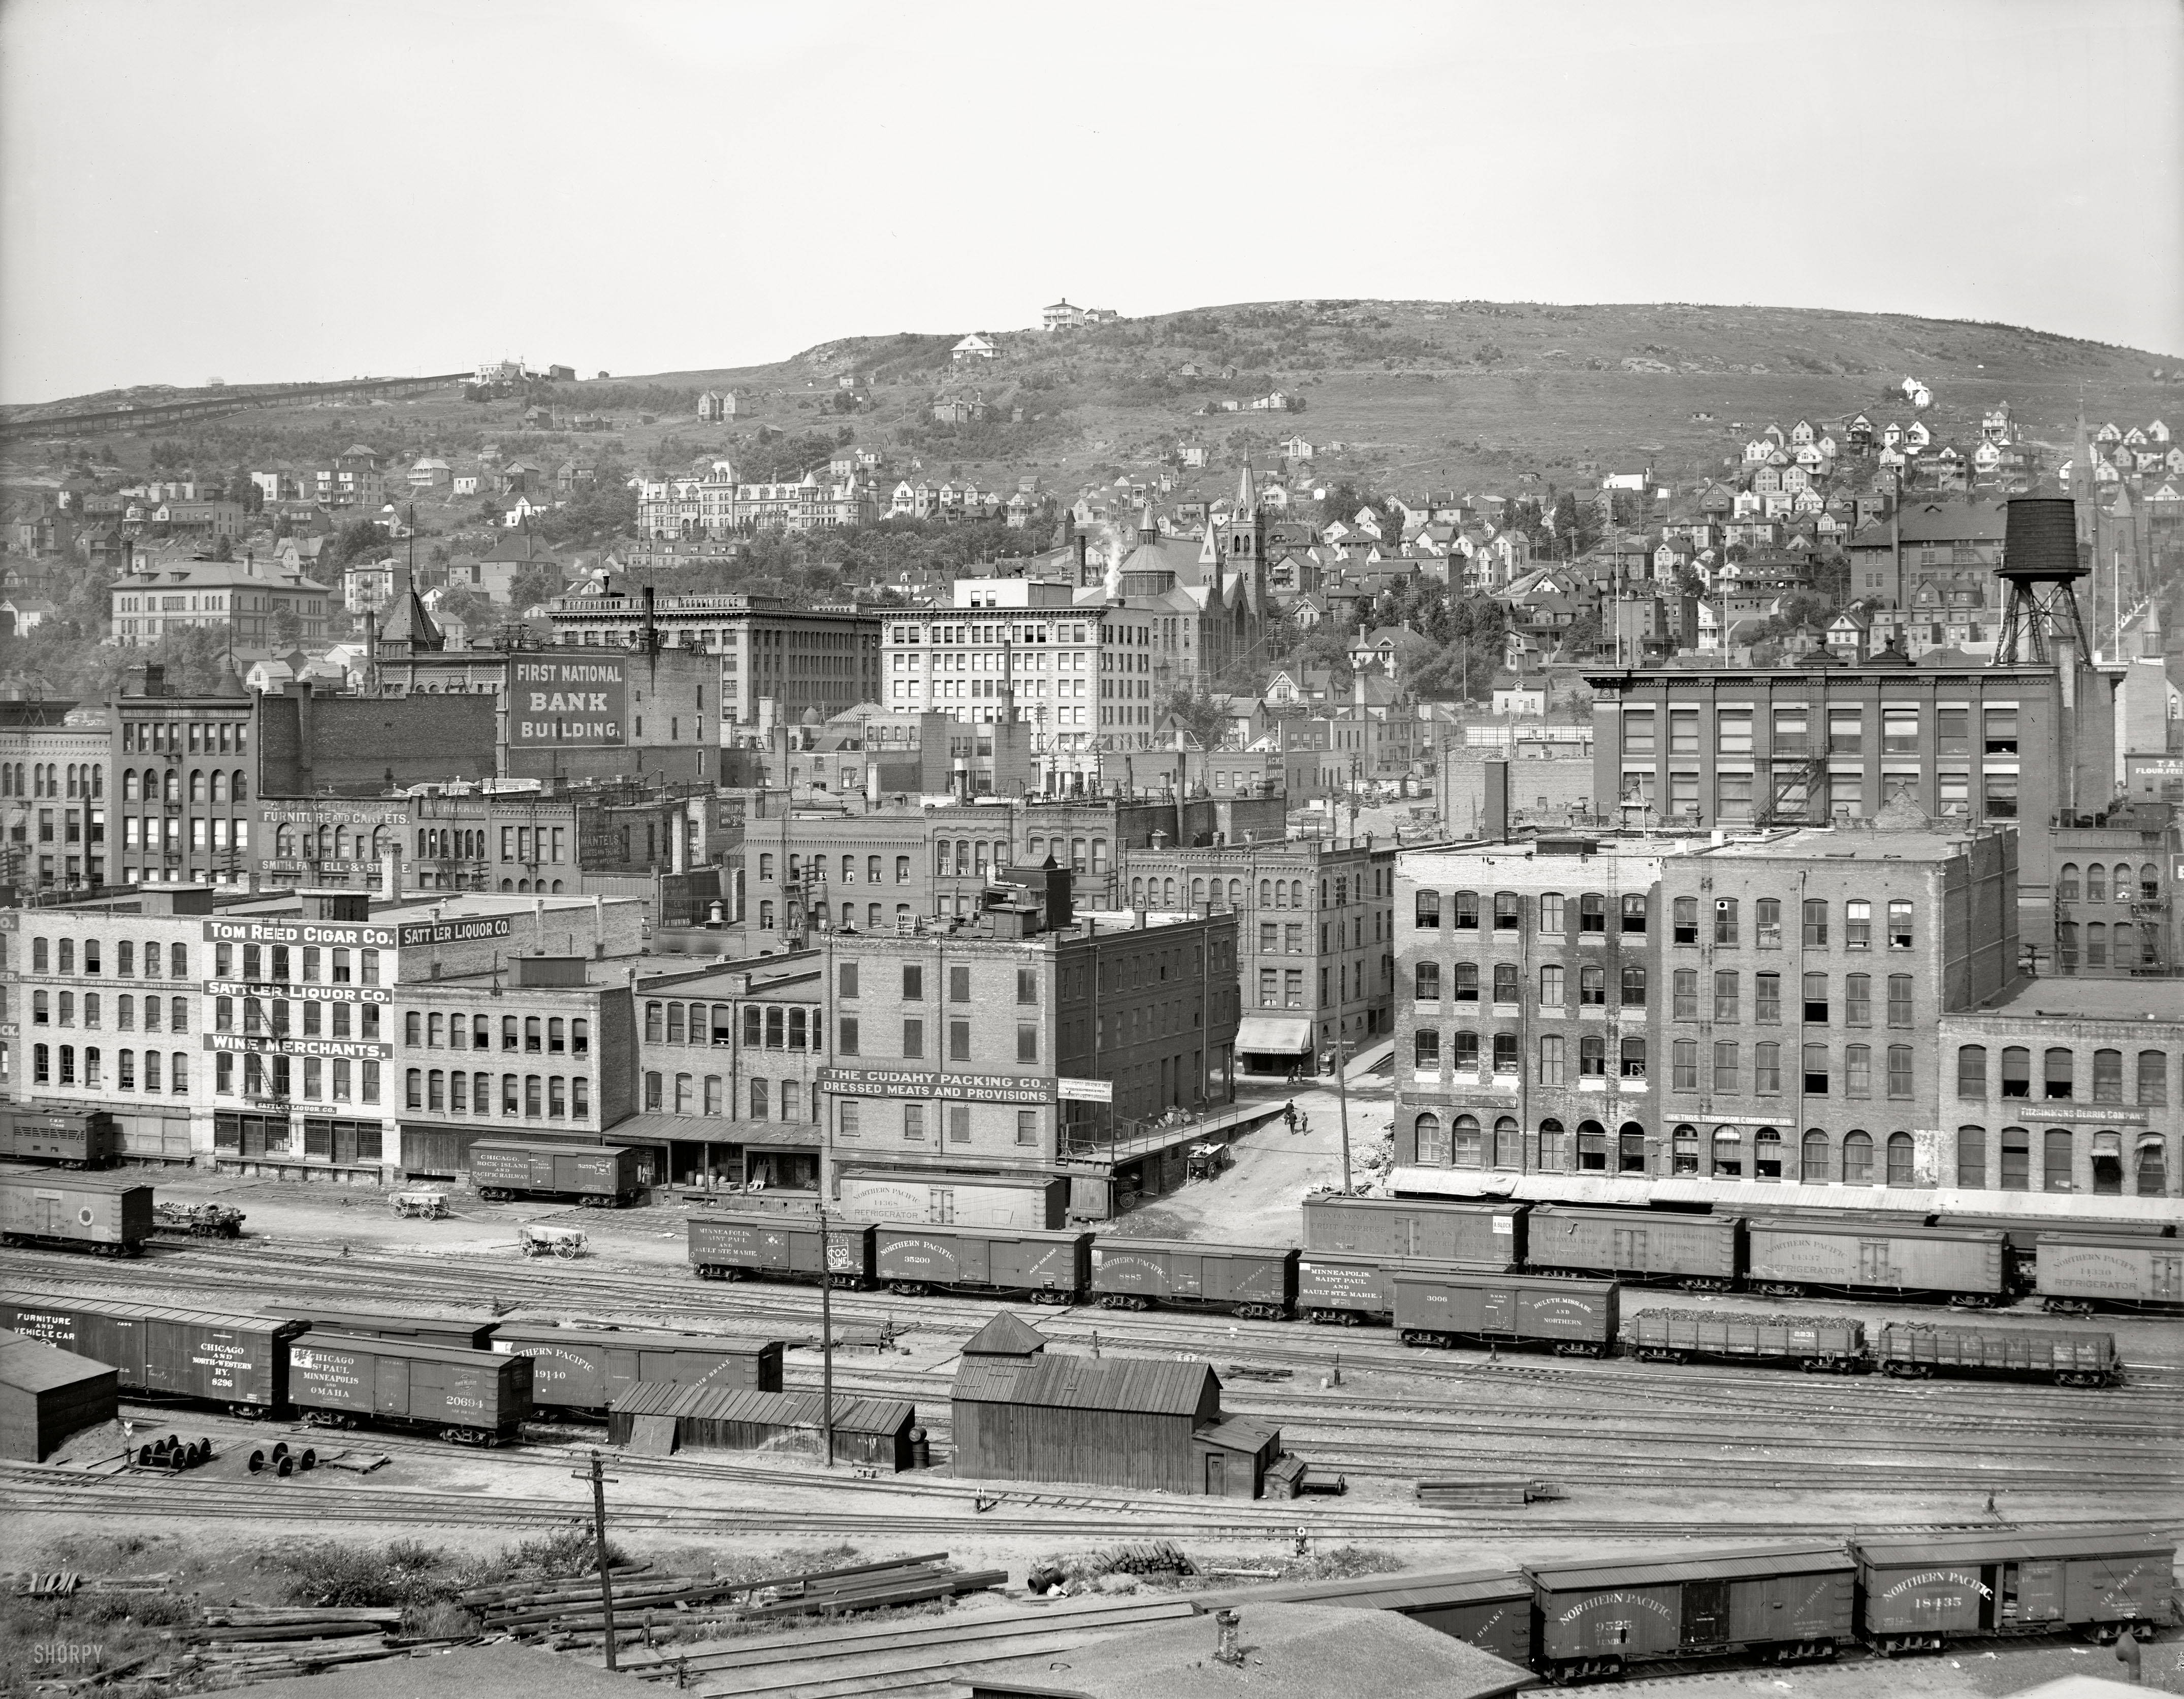 Circa 1905. "Duluth, Minnesota." Another view from the Zenith City panoramic series. Detroit Publishing Company glass negative. View full size.